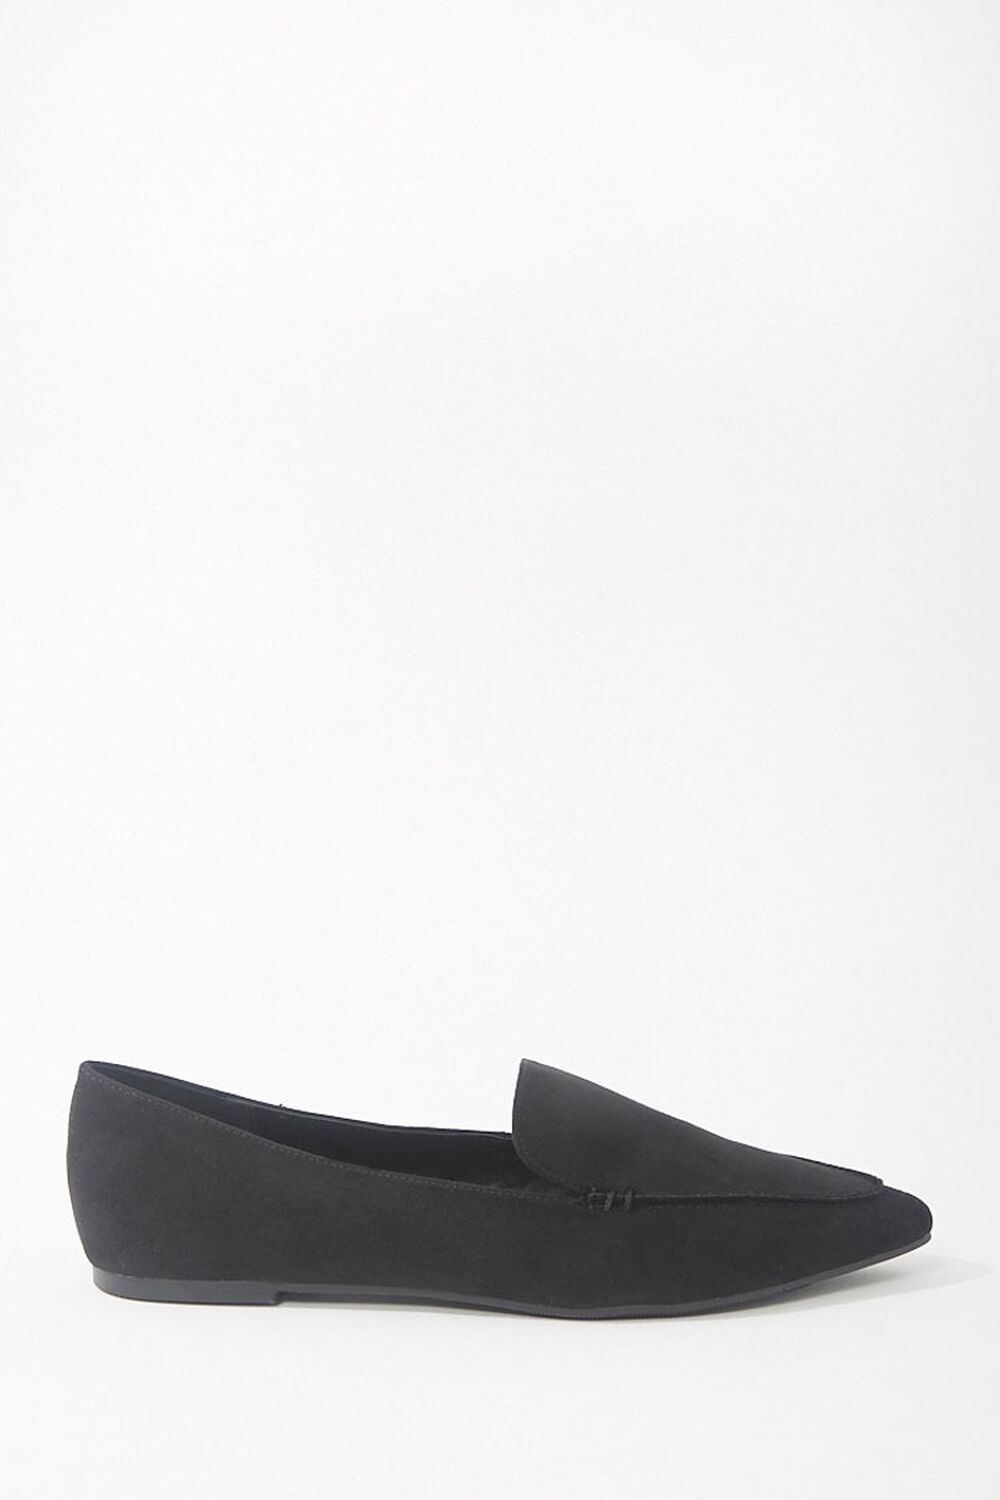 BLACK Faux Suede Pointed-Toe Loafers, image 1